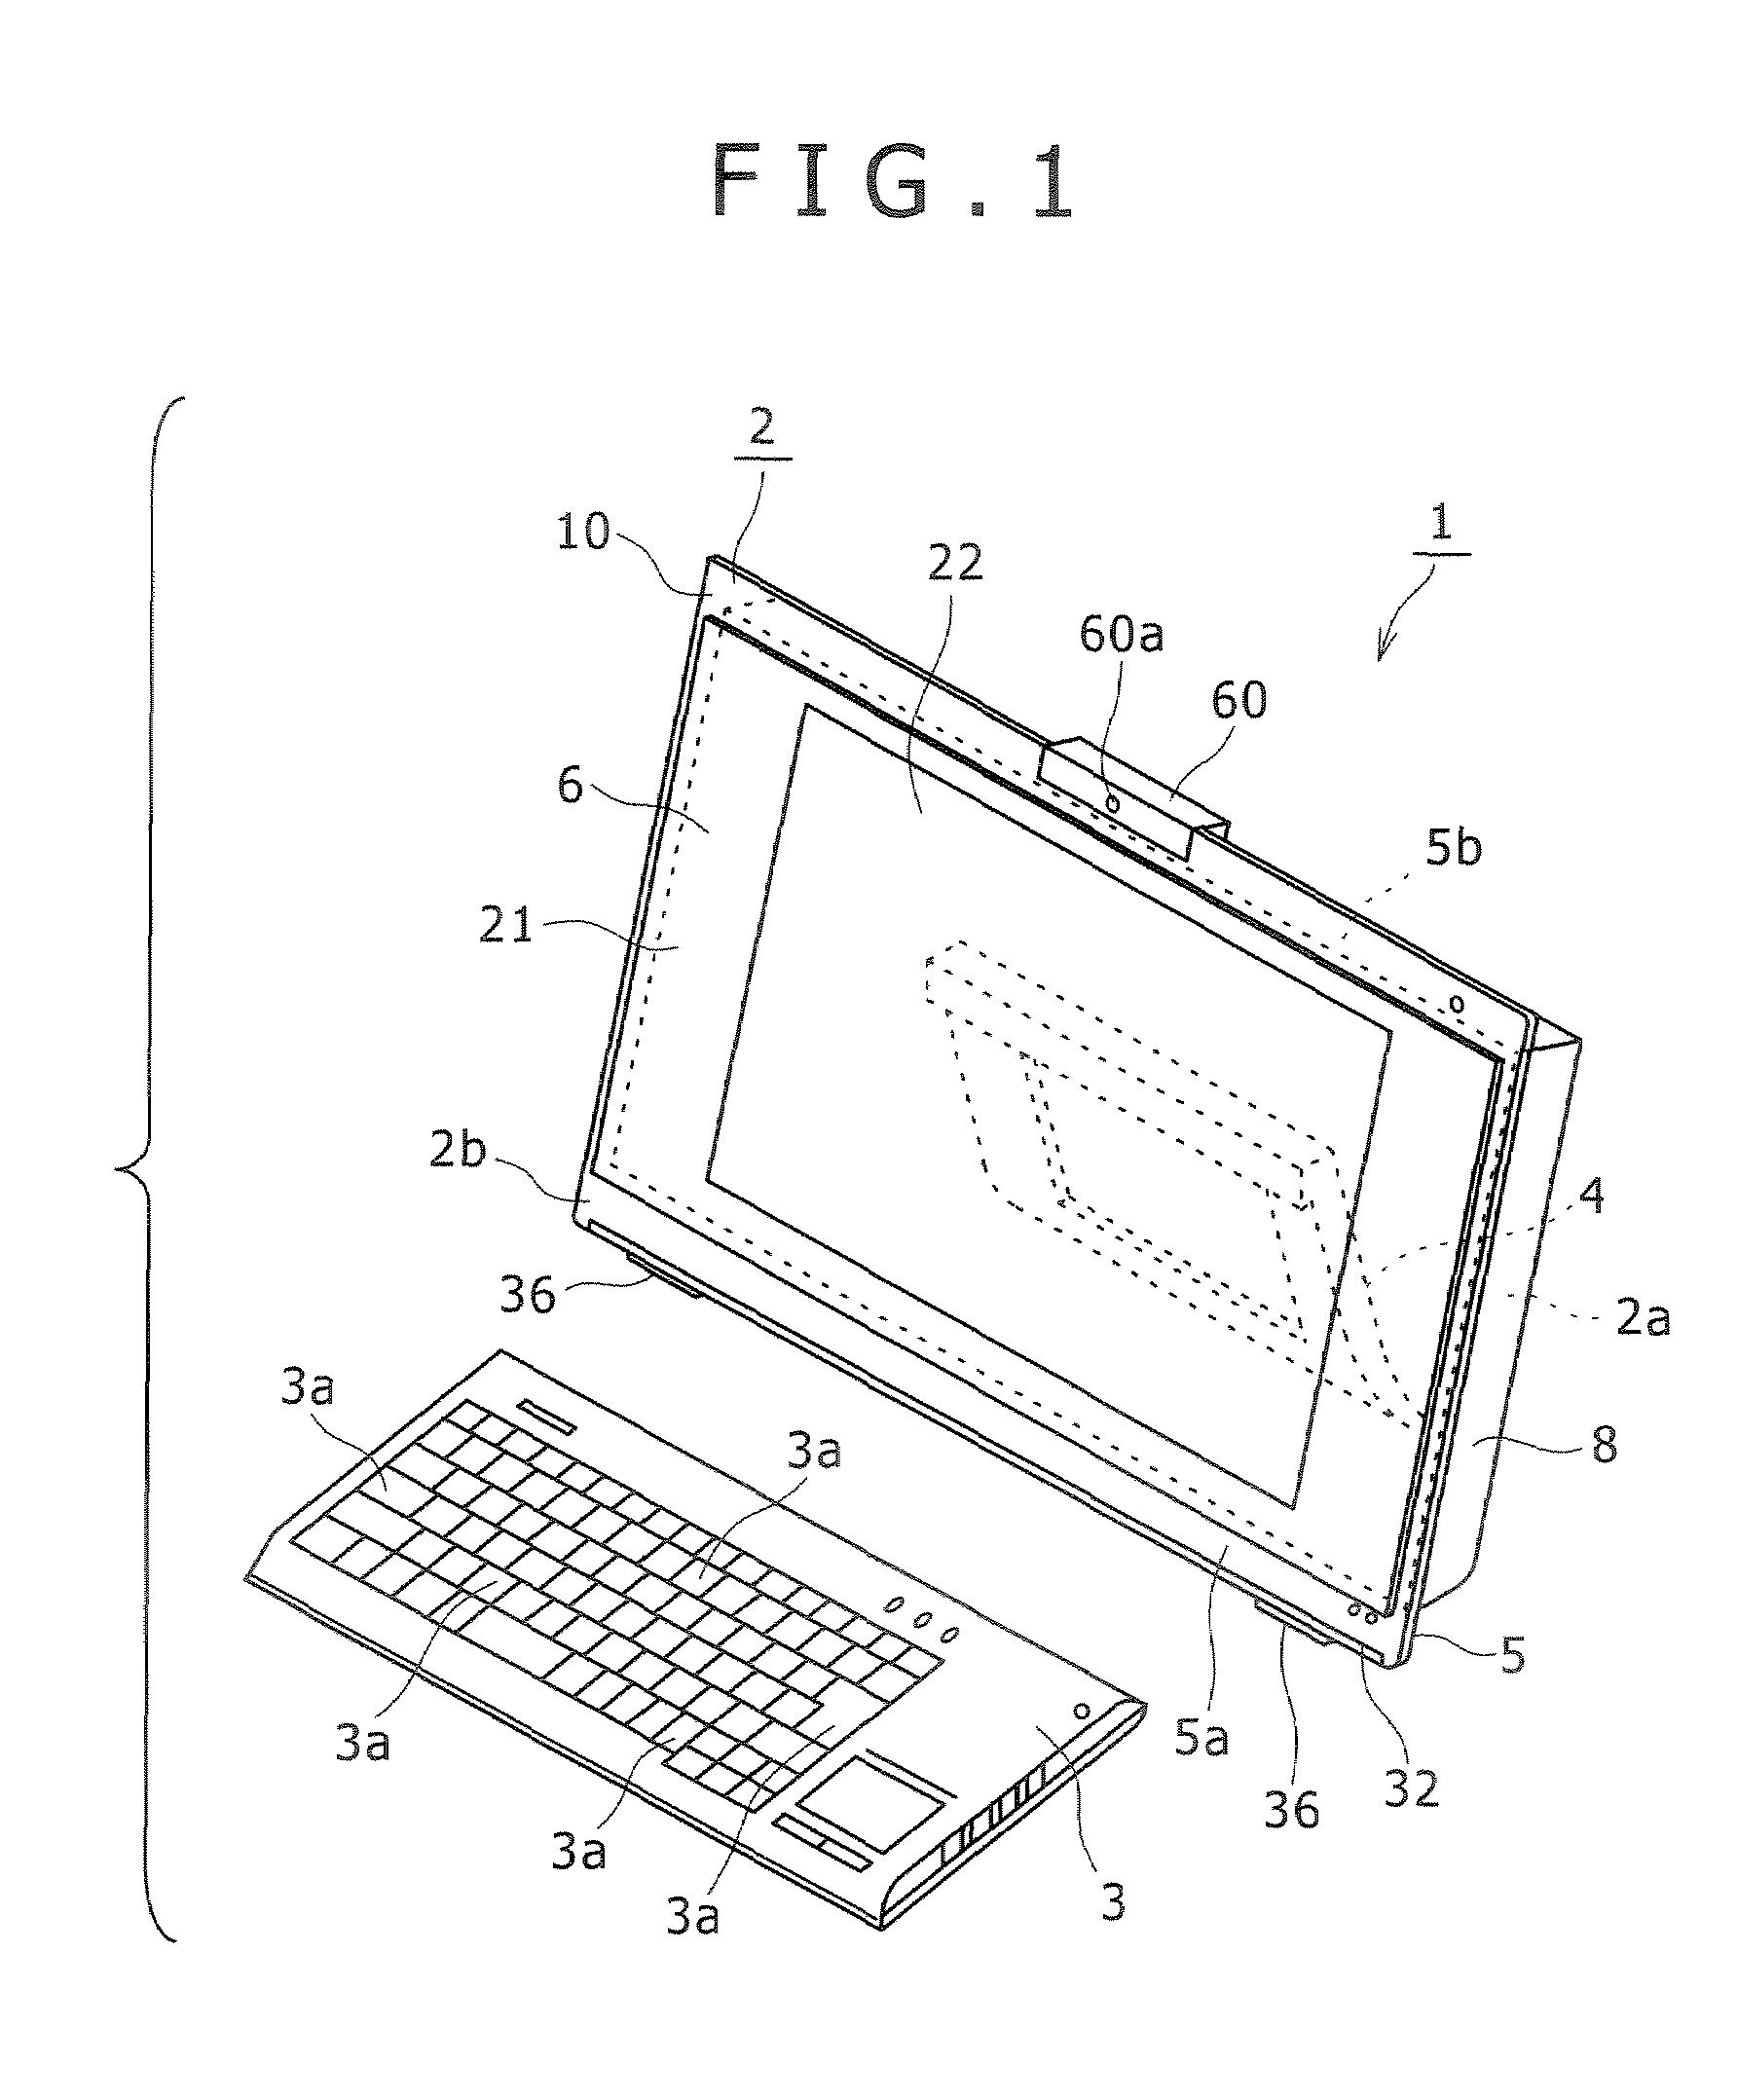 Electronic apparatus emitting light through a unitary transparent base chassis